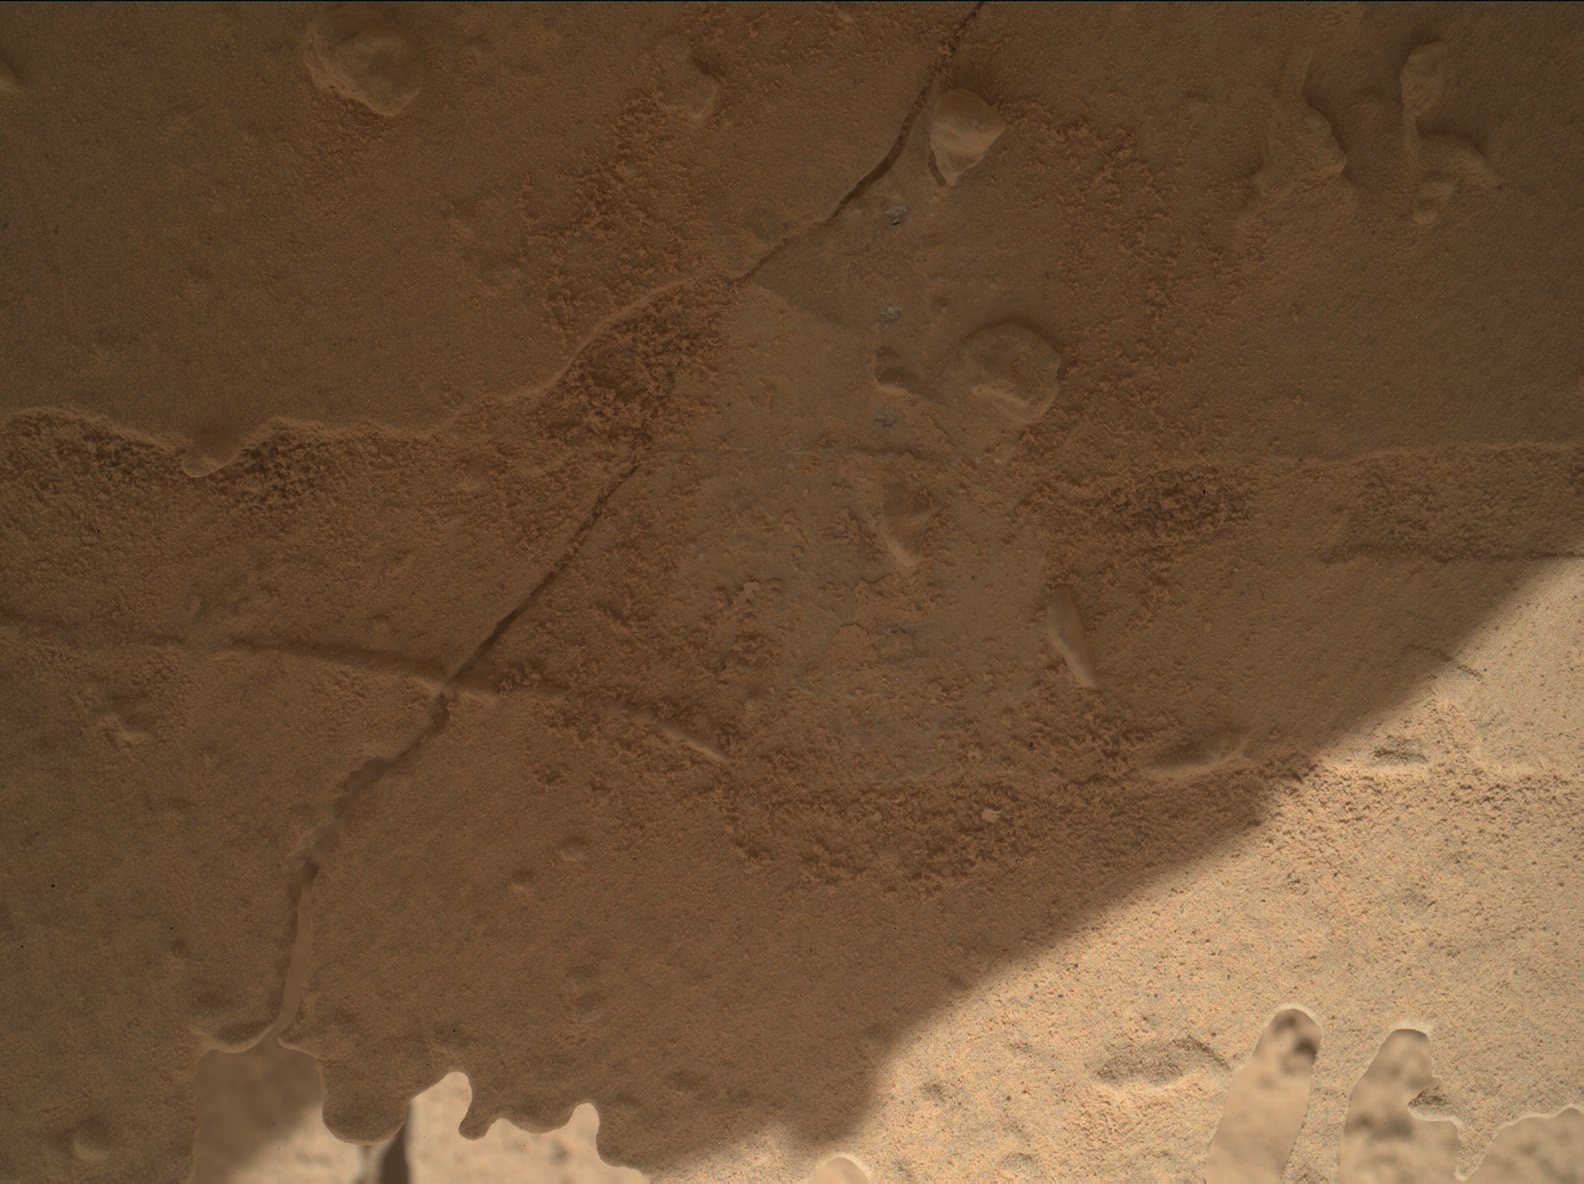 Nasa's Mars rover Curiosity acquired this image using its Mars Hand Lens Imager (MAHLI) on Sol 3892